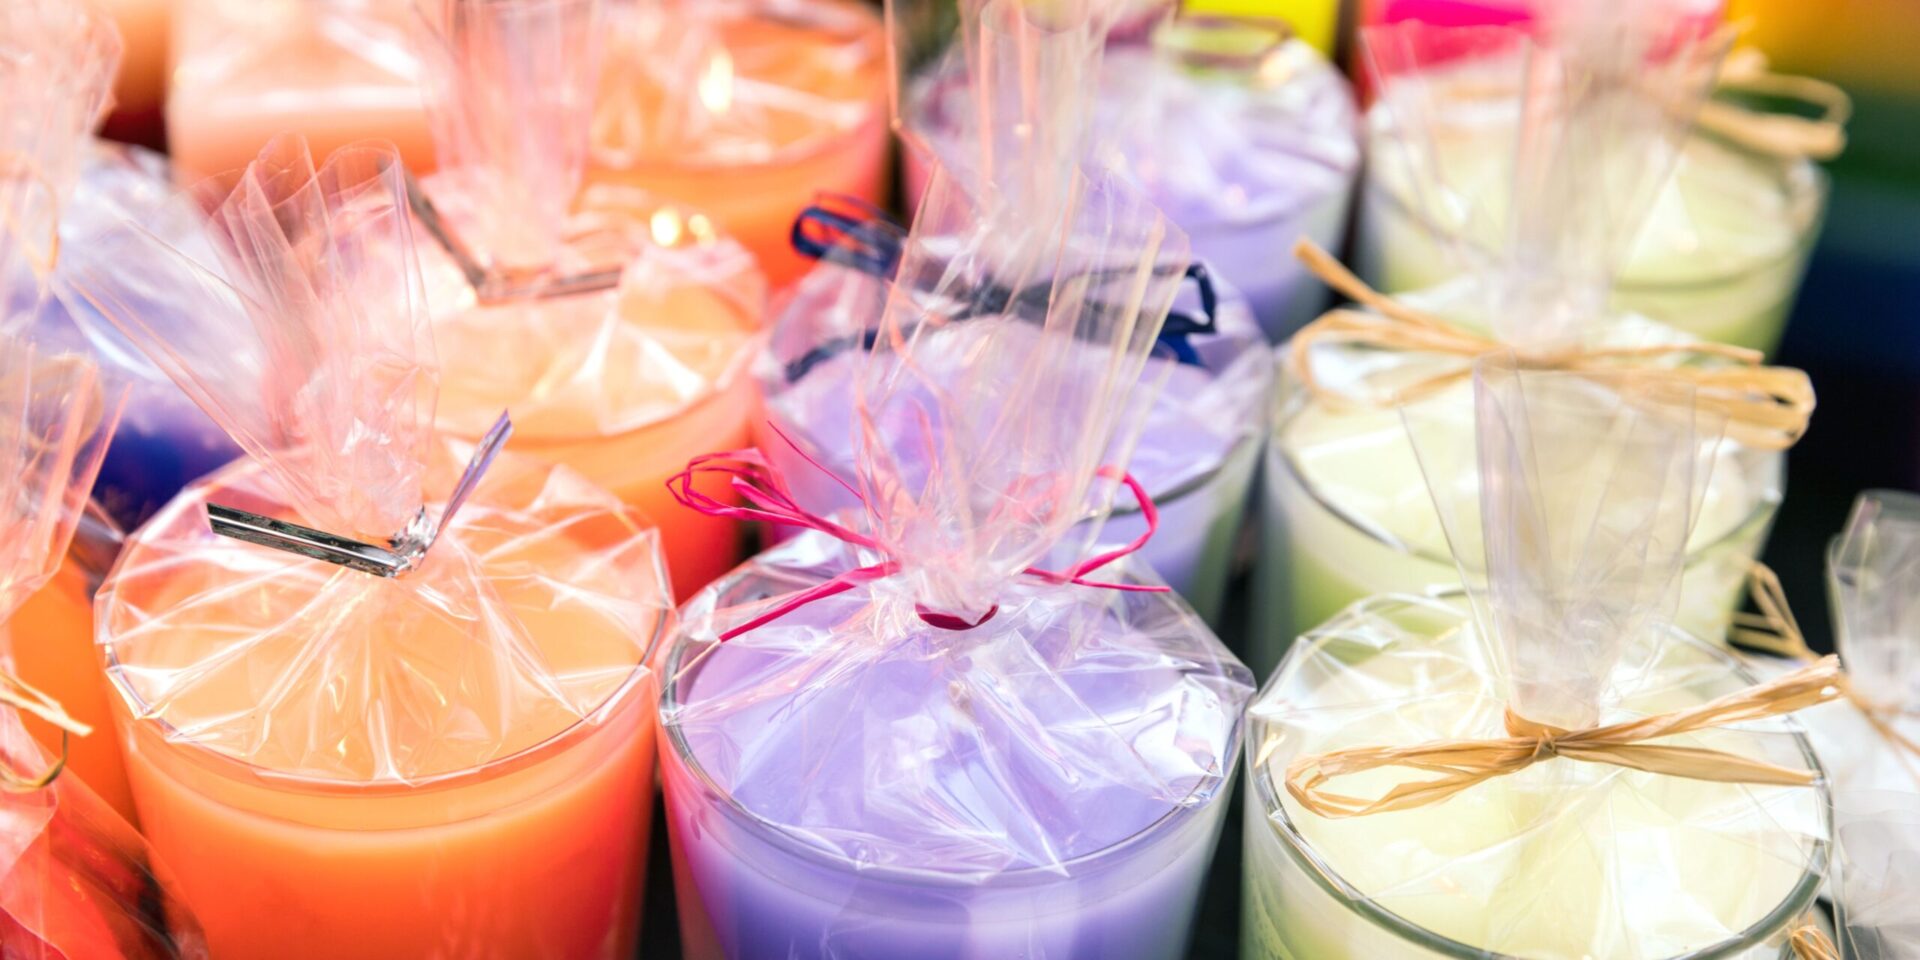 Light Up Your Business: 200 Candle Company Name Ideas